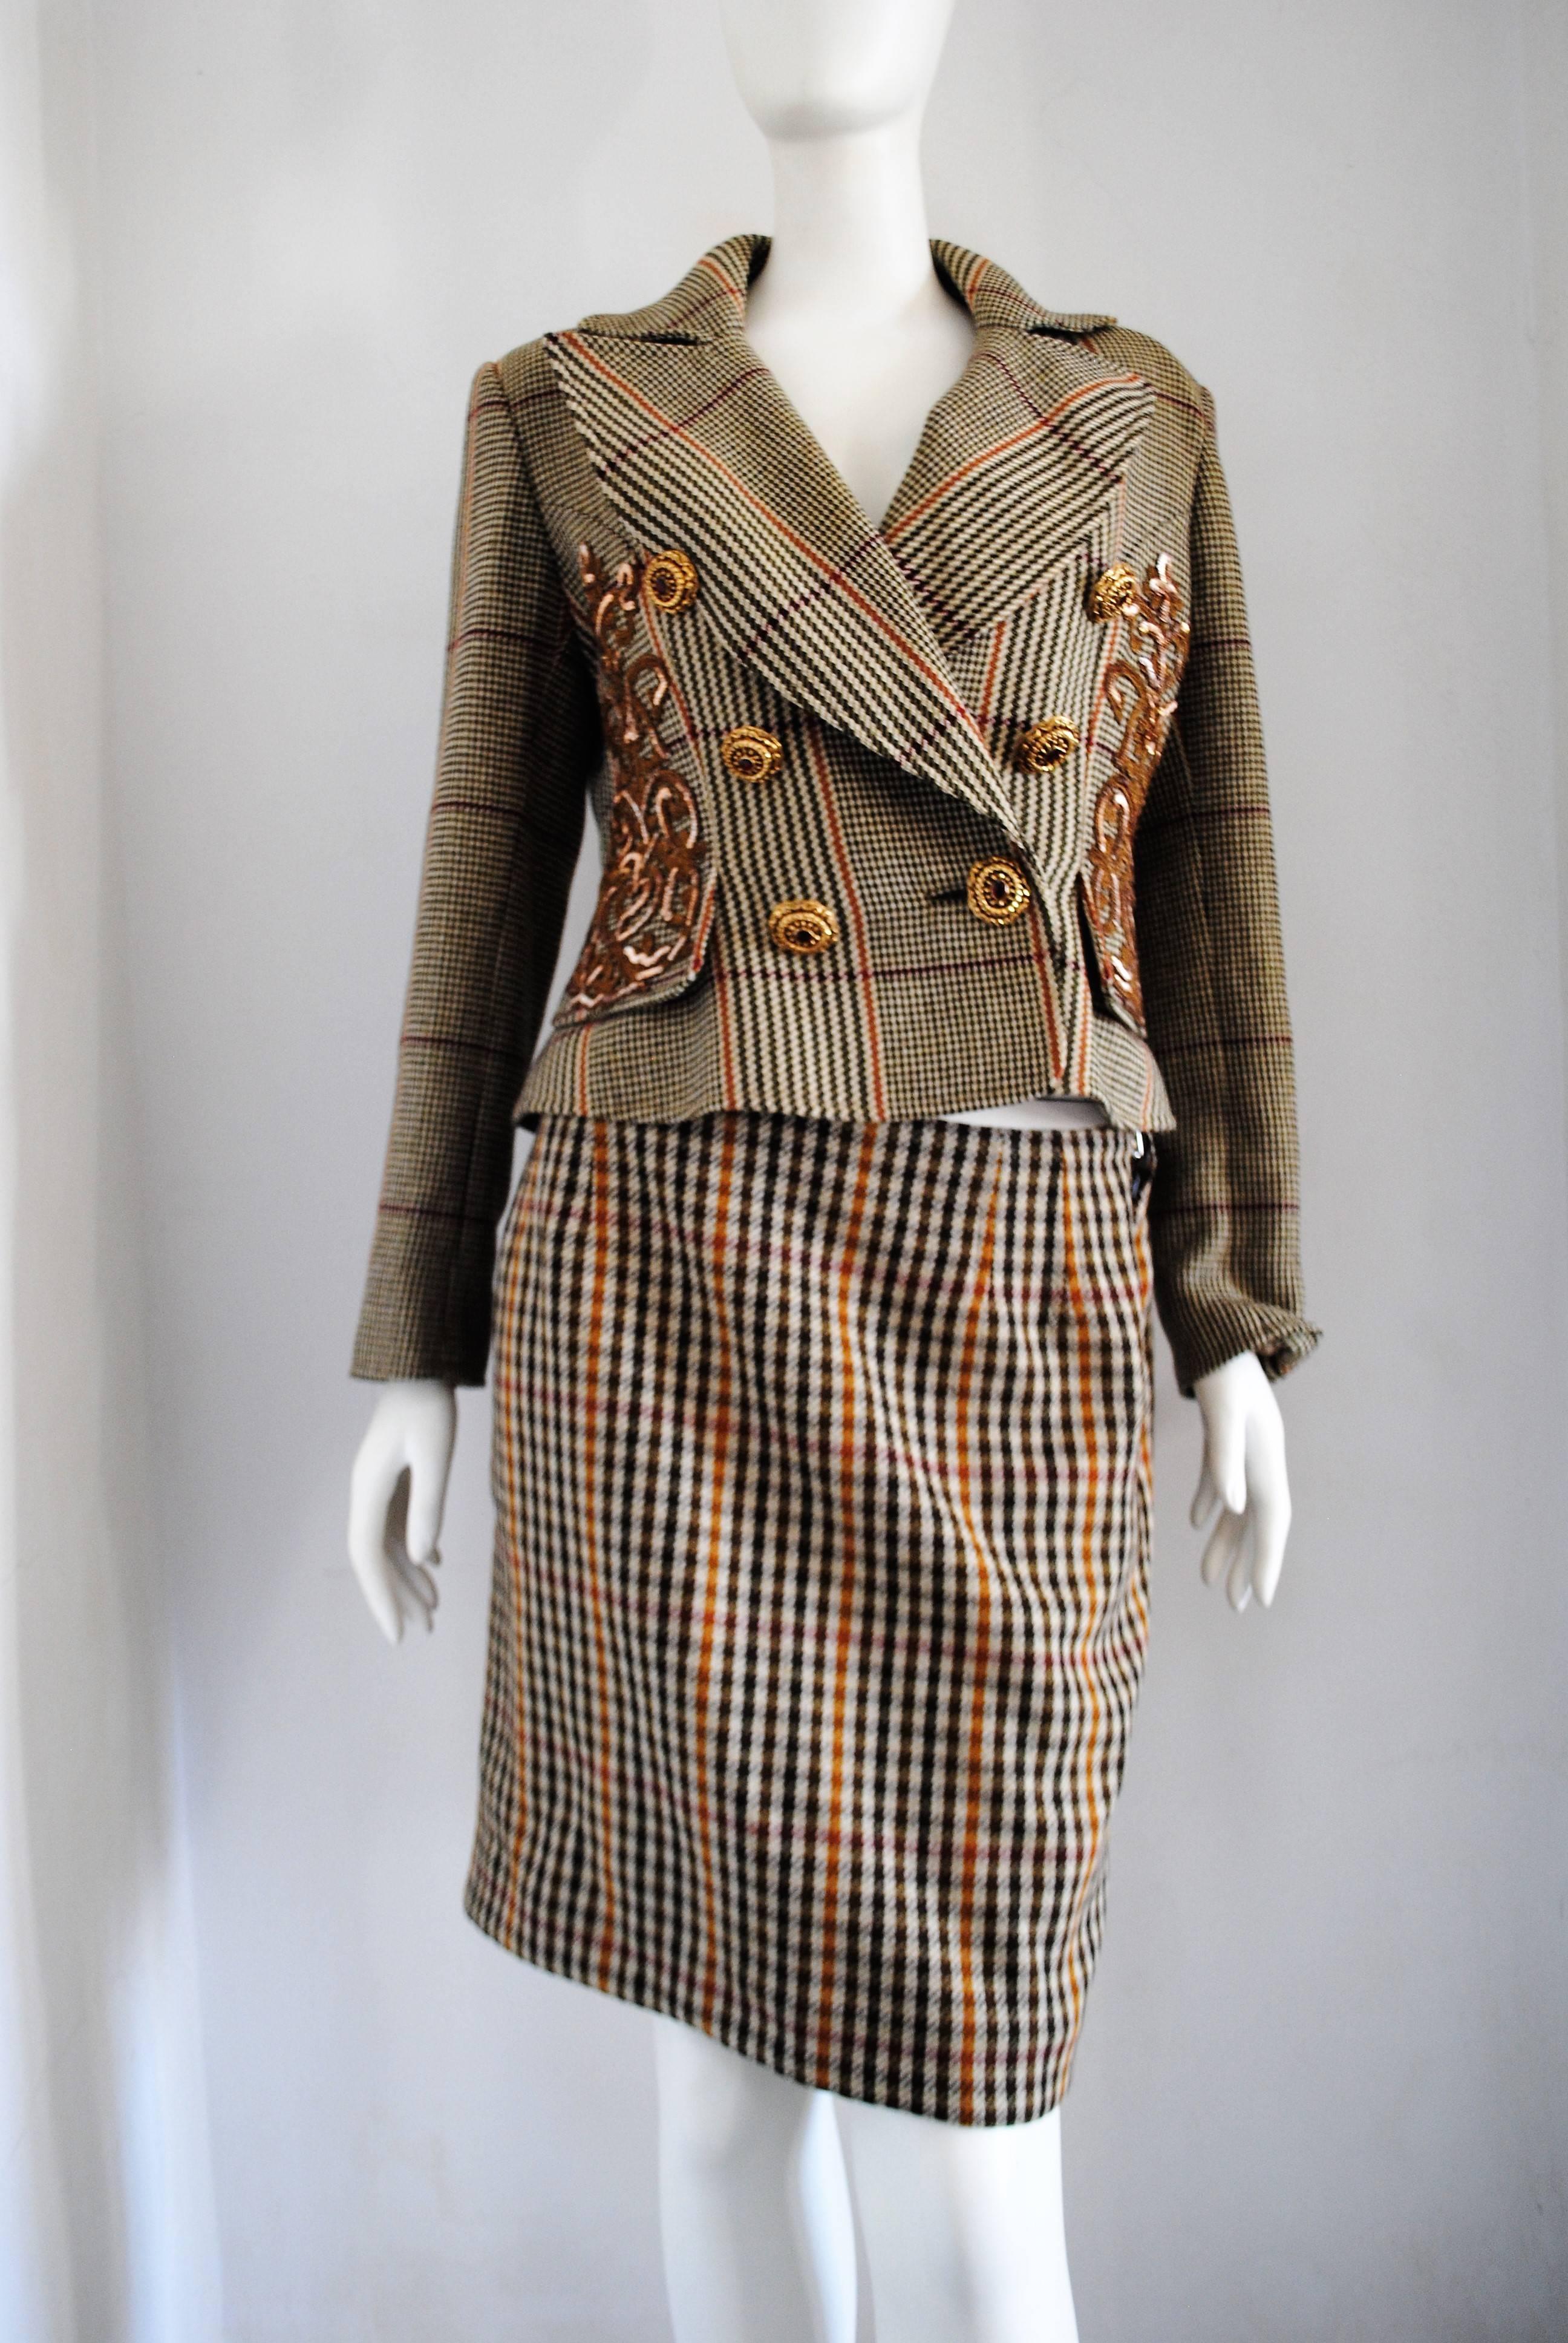 Christian Lacroix Skirt suit
Totally made in france in size 38 
Gold tone bottons